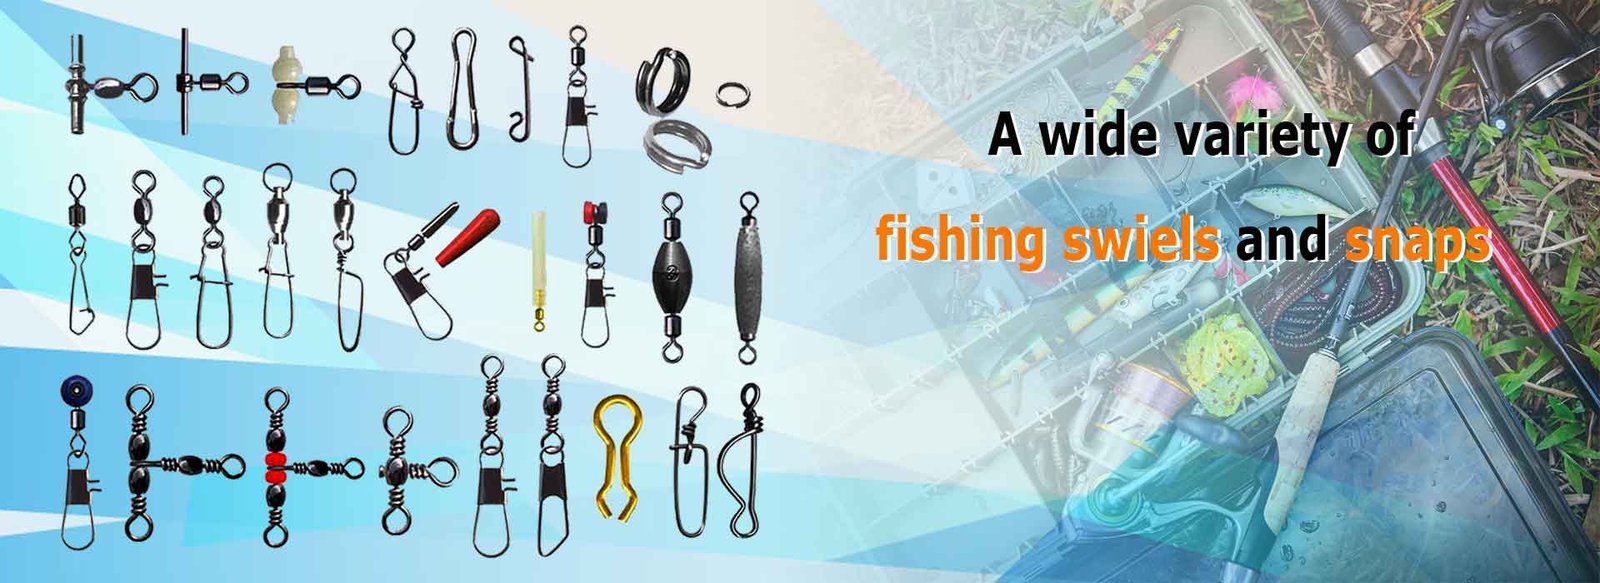 Should You Use Snap Swivels or Will They Scare Fish?